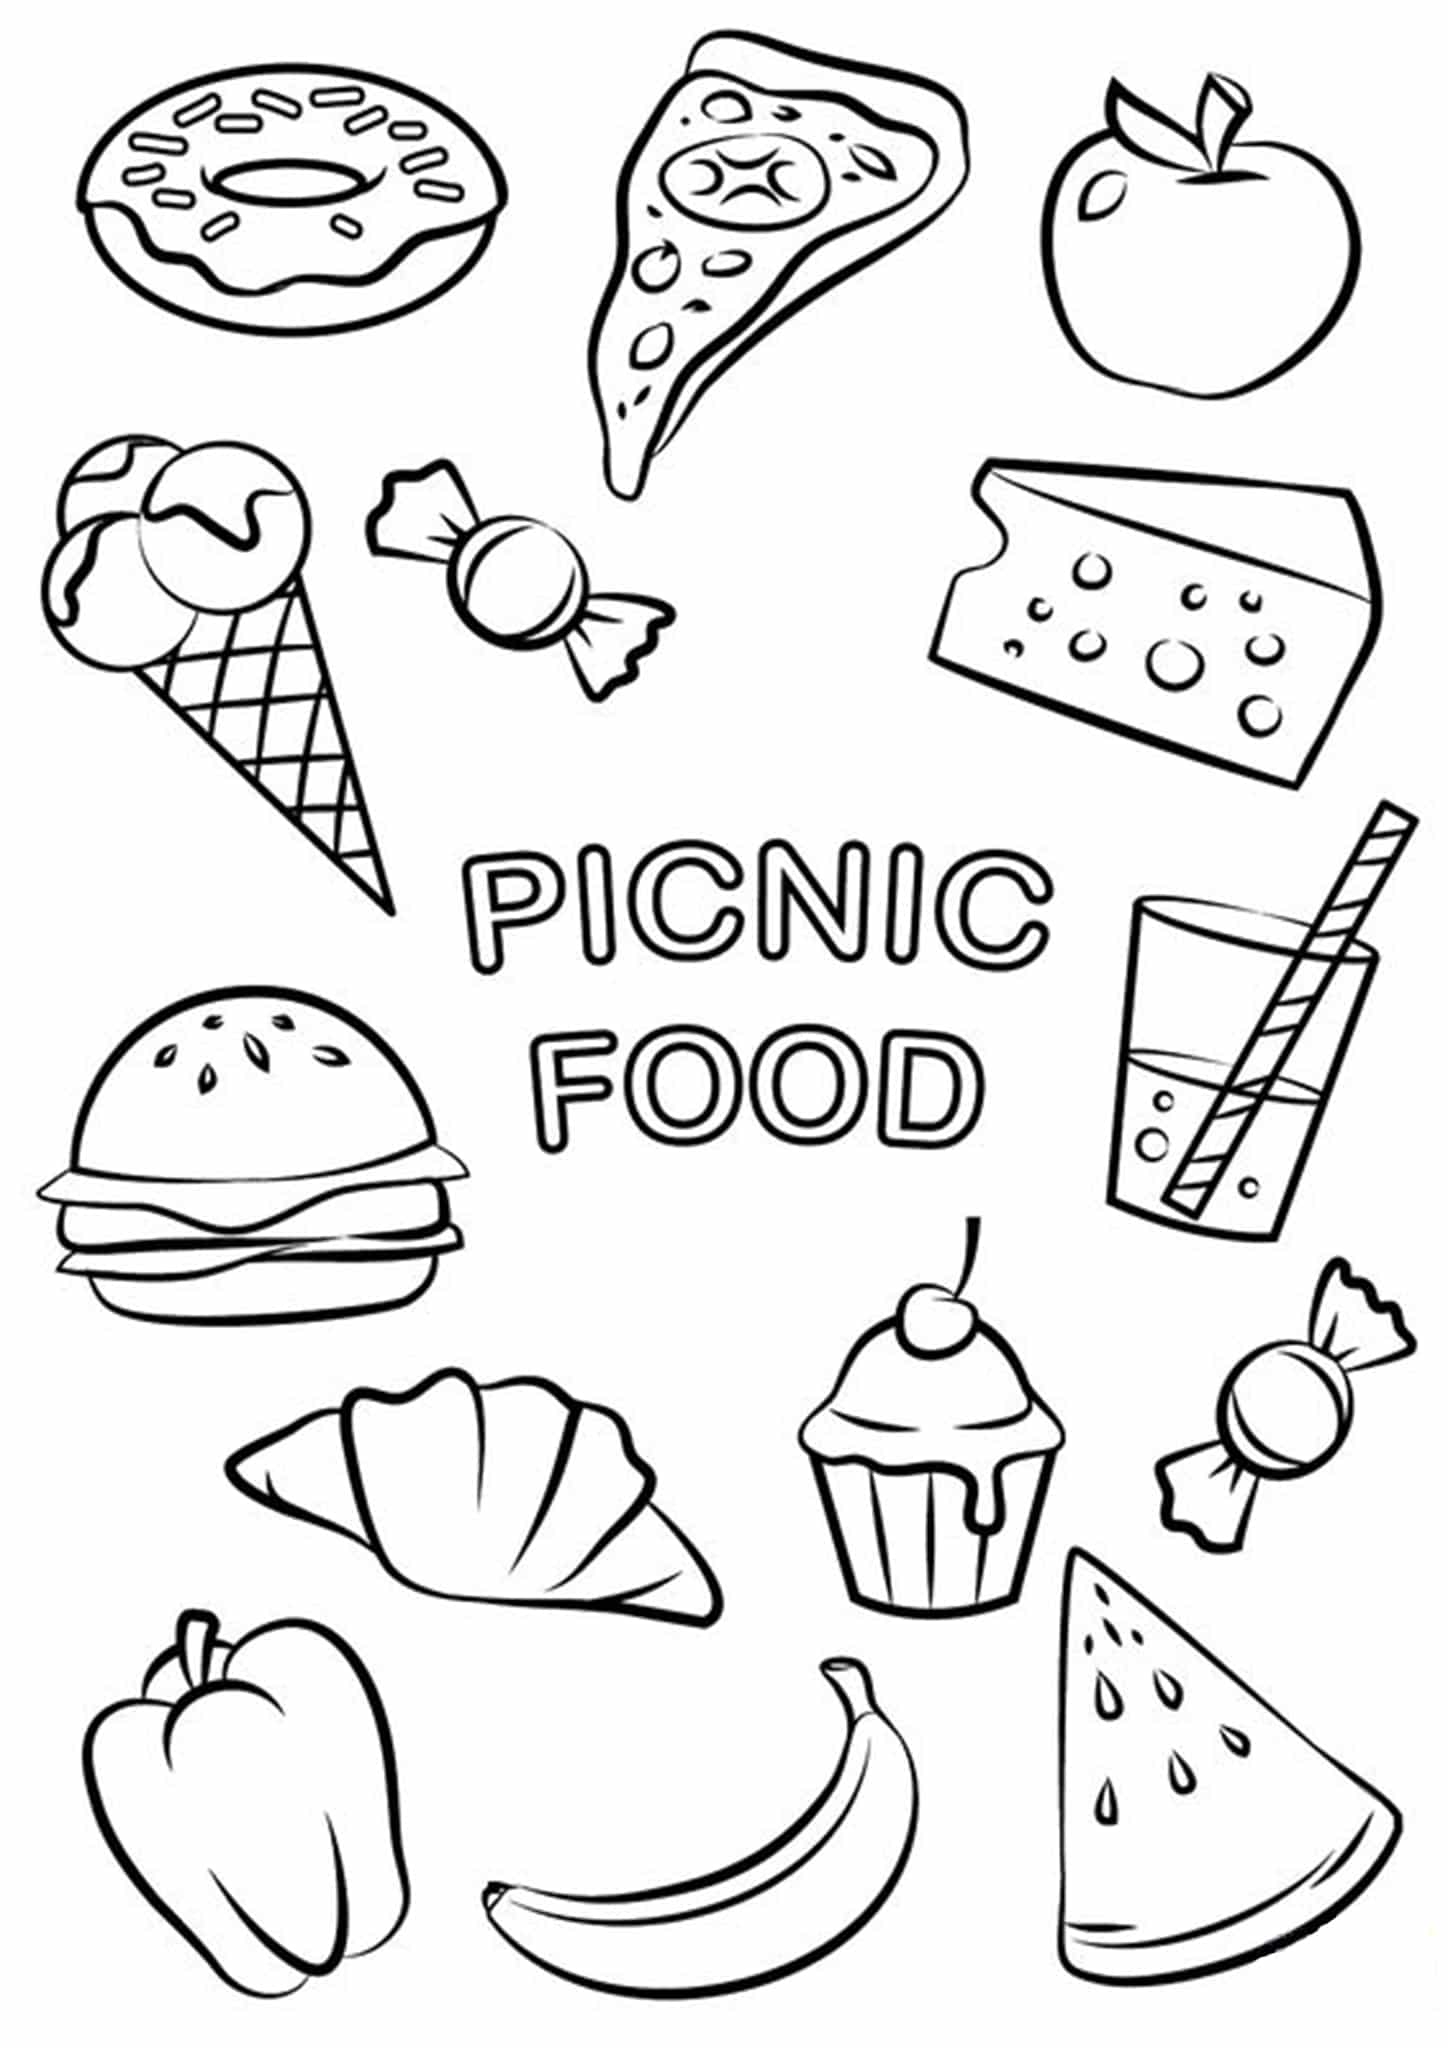 Free easy to print food coloring pages